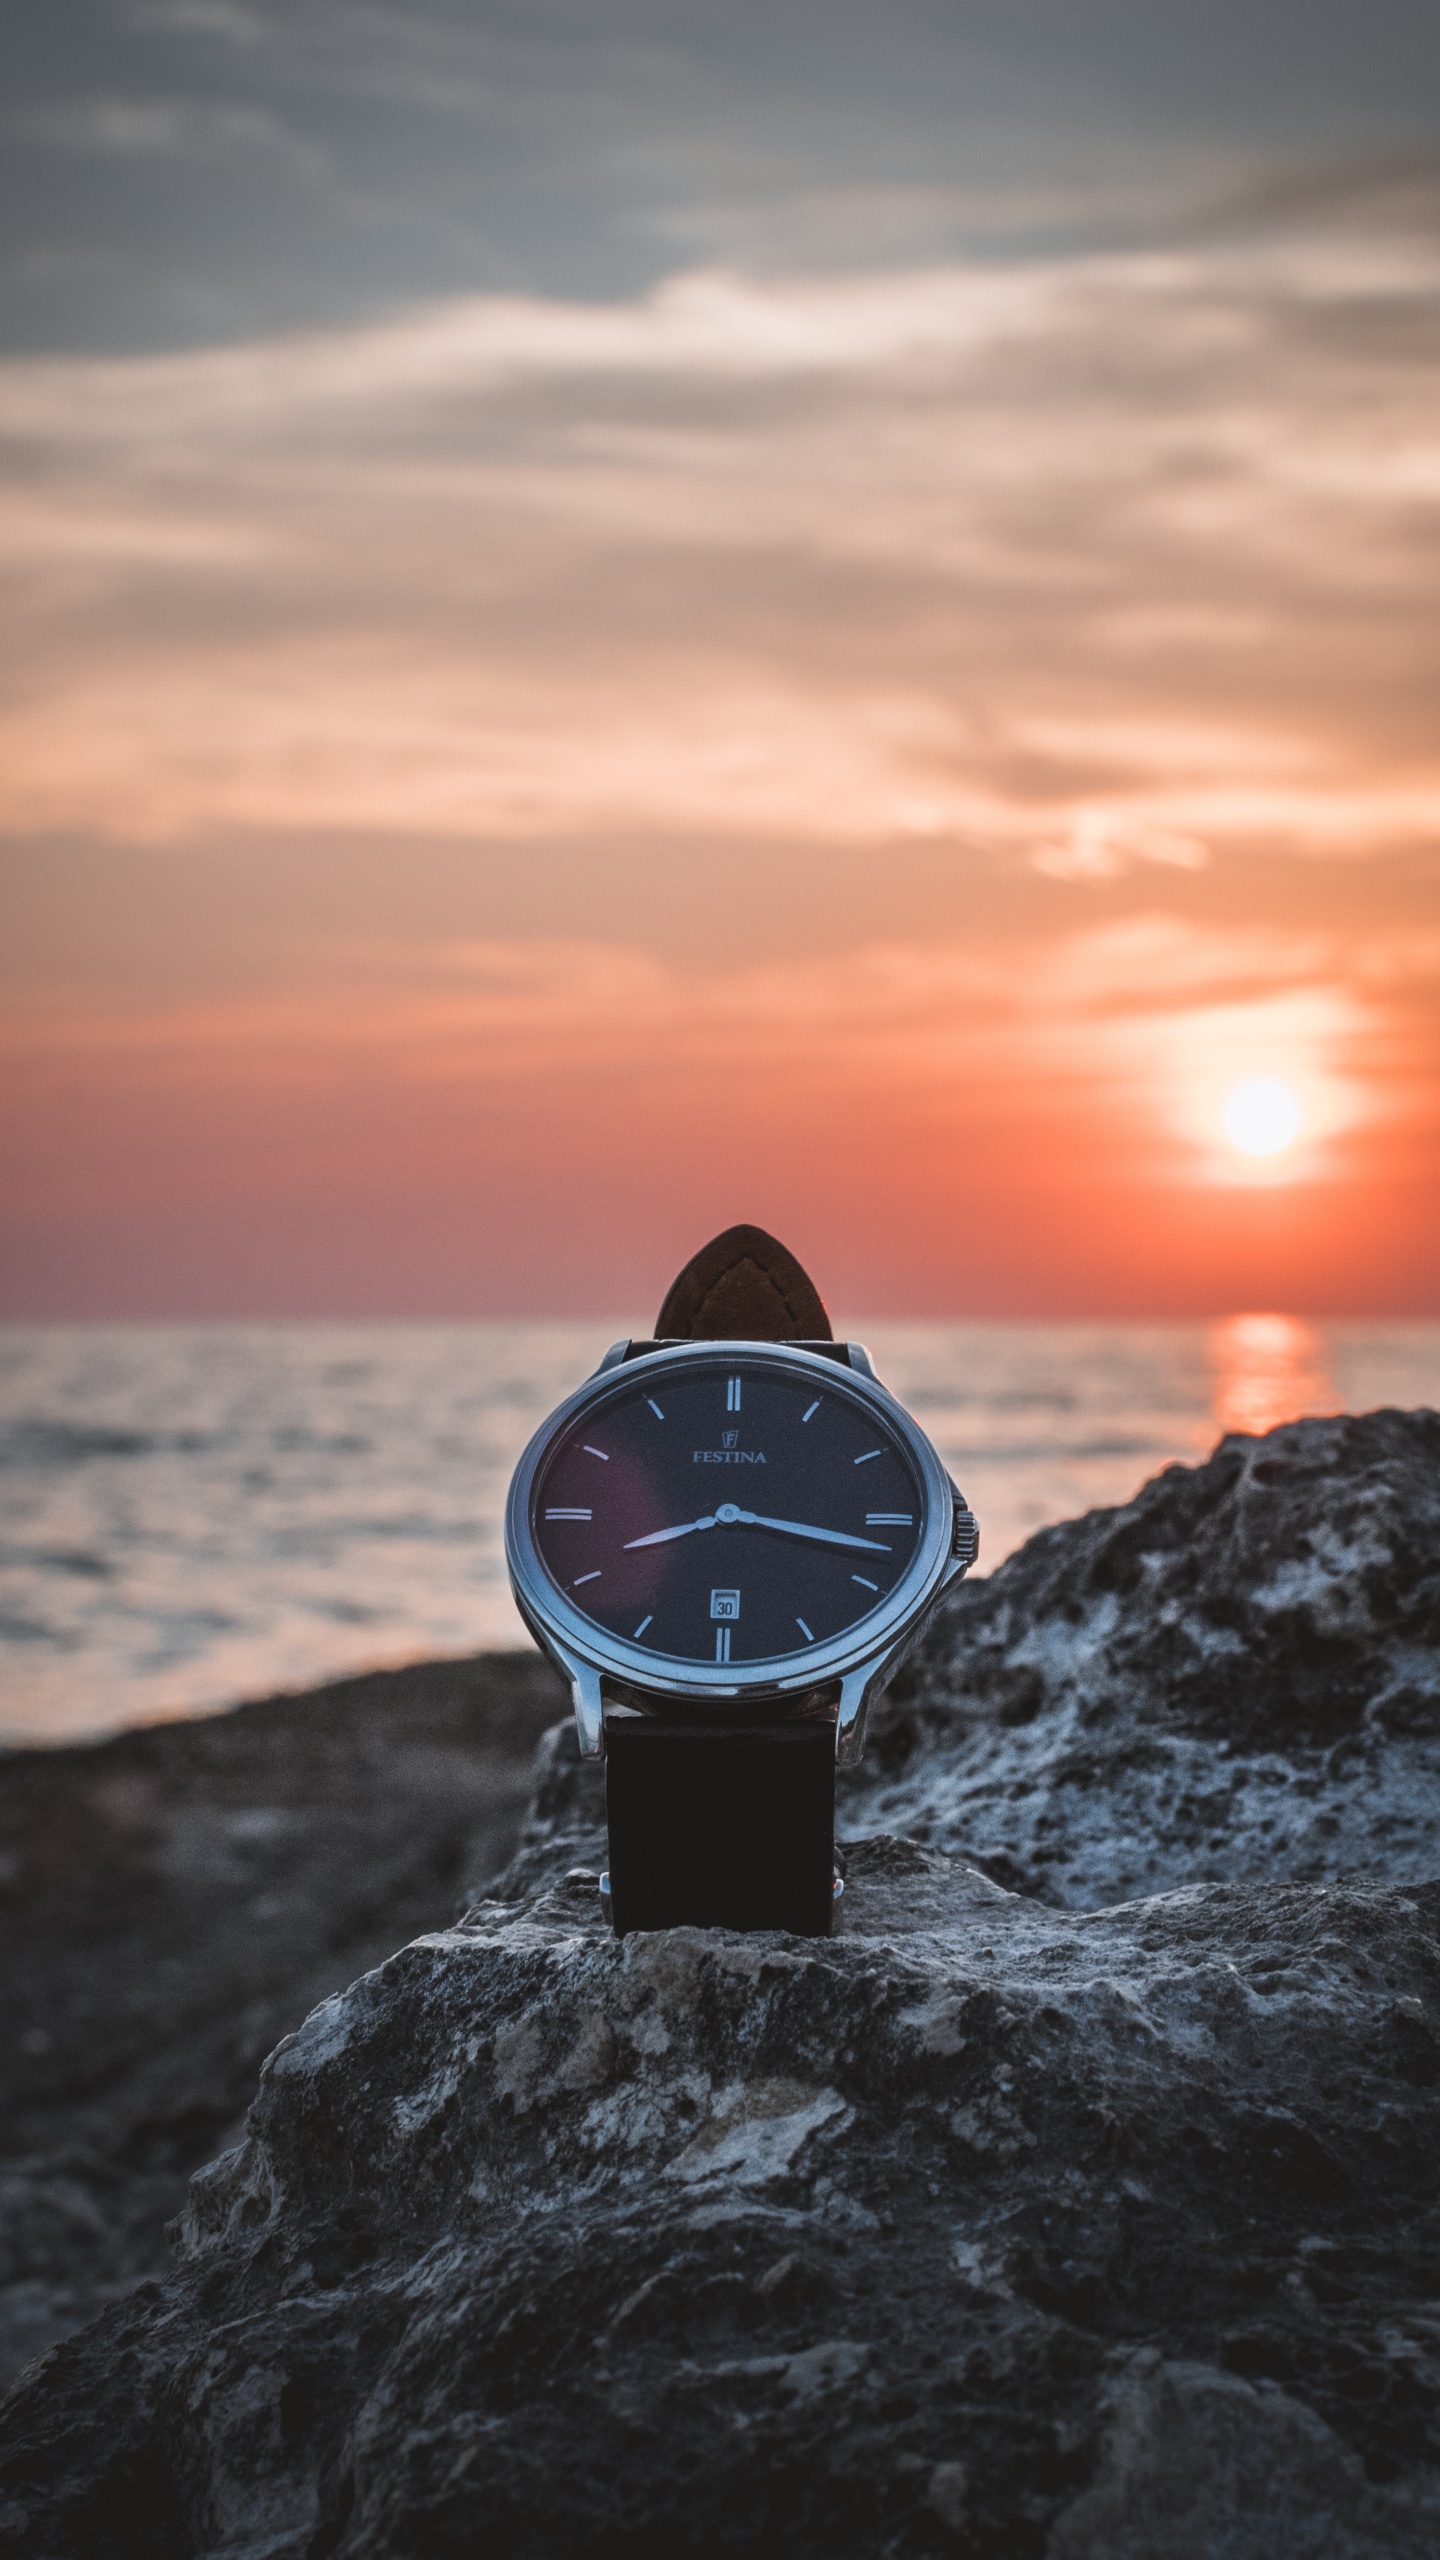 Black and White Analog Watch on Gray Rock Near Sea During Sunset. Wallpaper in 1440x2560 Resolution